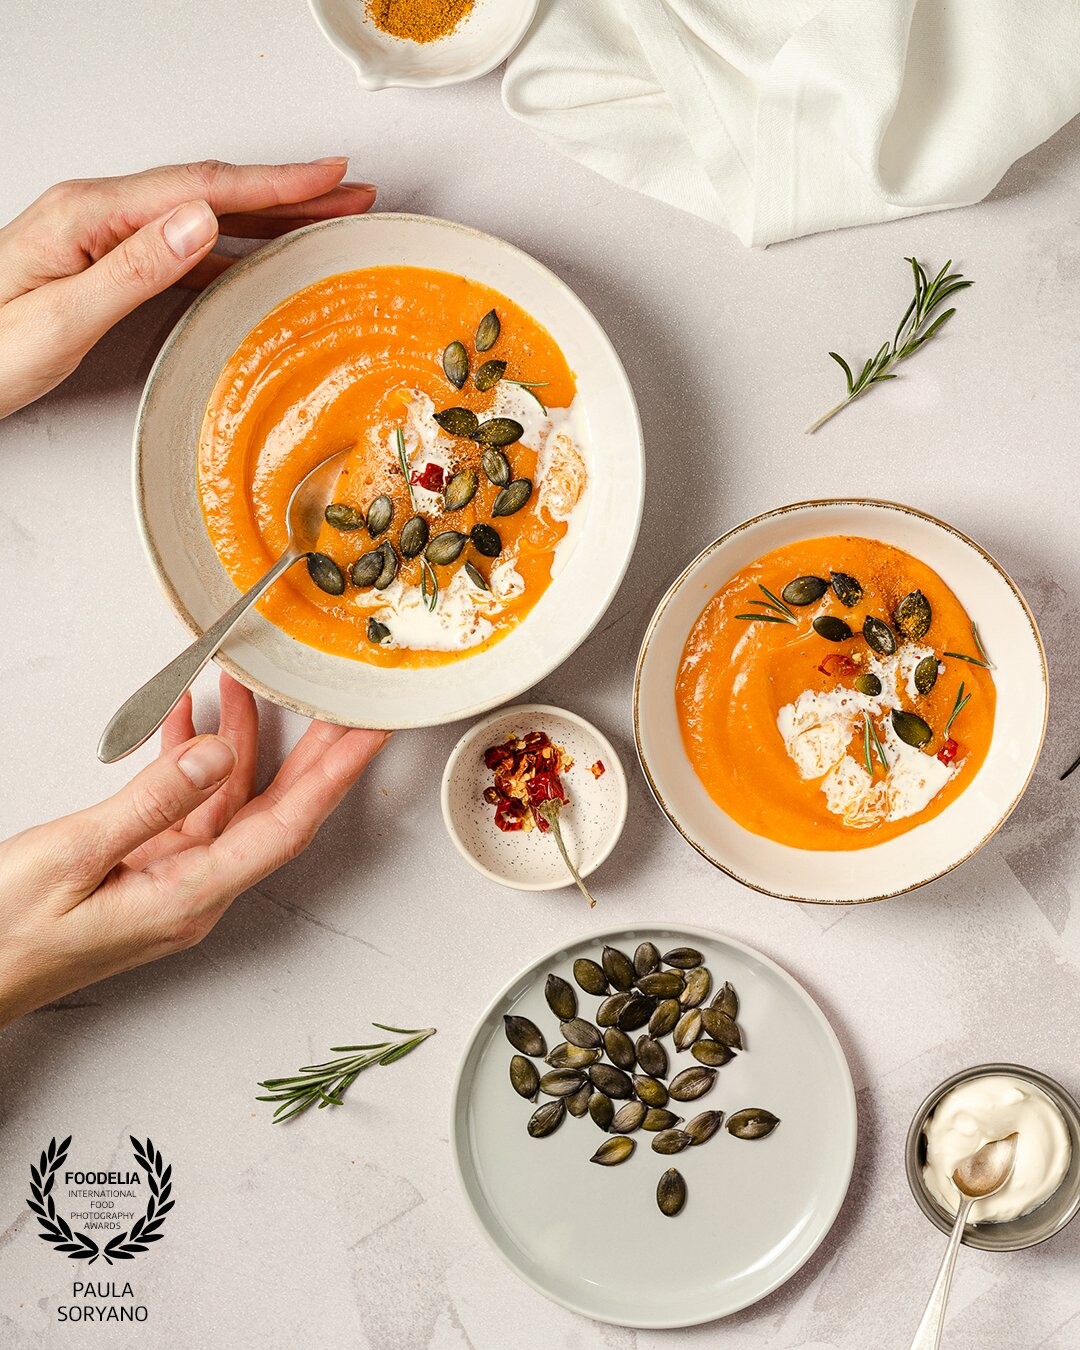 A butternut soup is creamy, delicious and sometimes photogenic ;)  when shooting I aim to incorporate seasonal, local veggies and avoid any food waste.